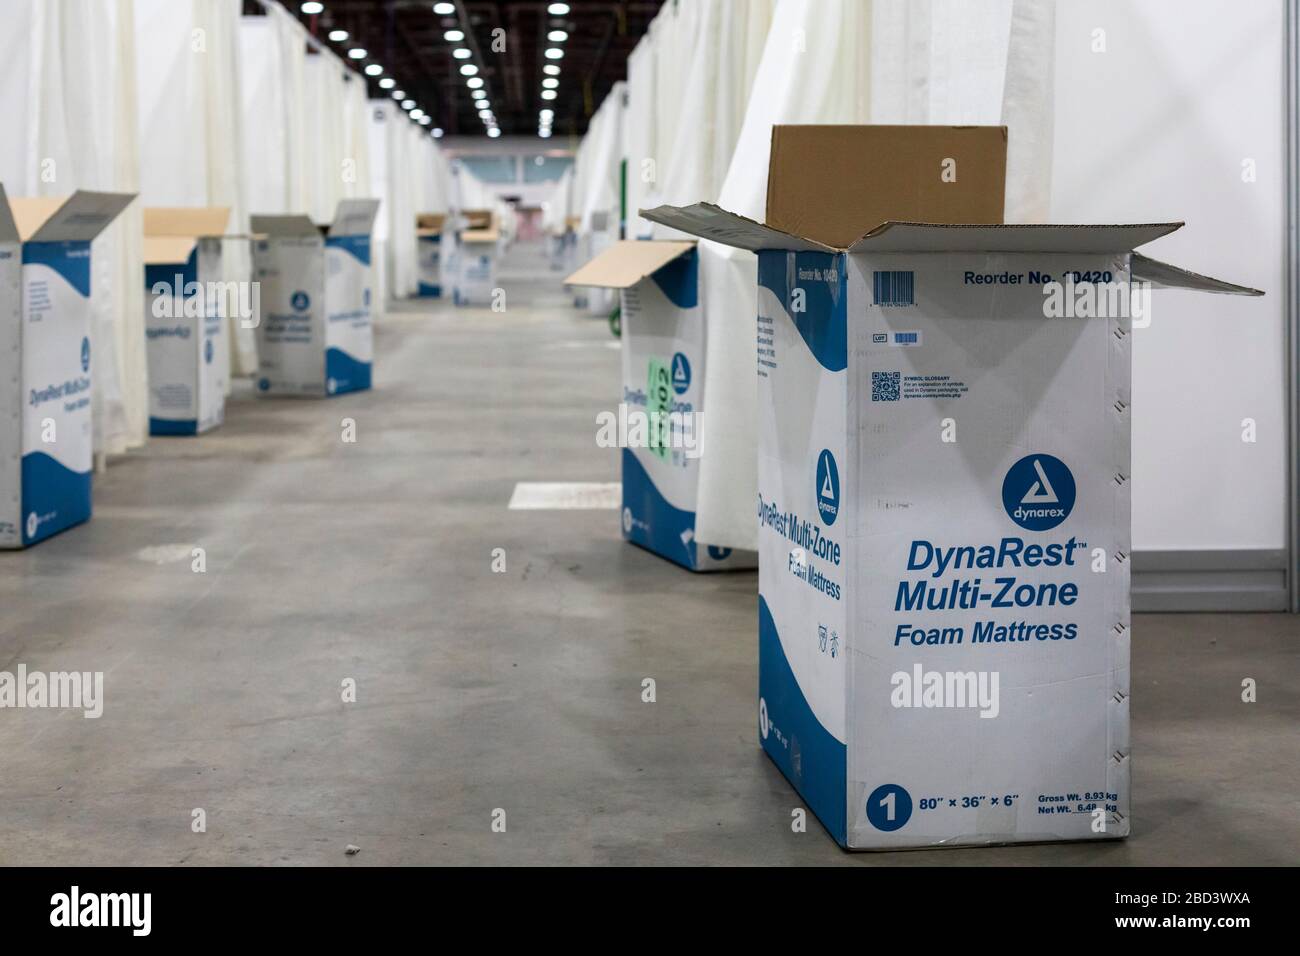 Detroit, Michigan, USA. 6th Apr, 2020. Workers construct an emergency field hospital at the TCF convention center. The 1,000-bed hospital will care for Covid-19 patients. Mattress boxes line the hall outside patient cubicles. Credit: Jim West/Alamy Live News Stock Photo